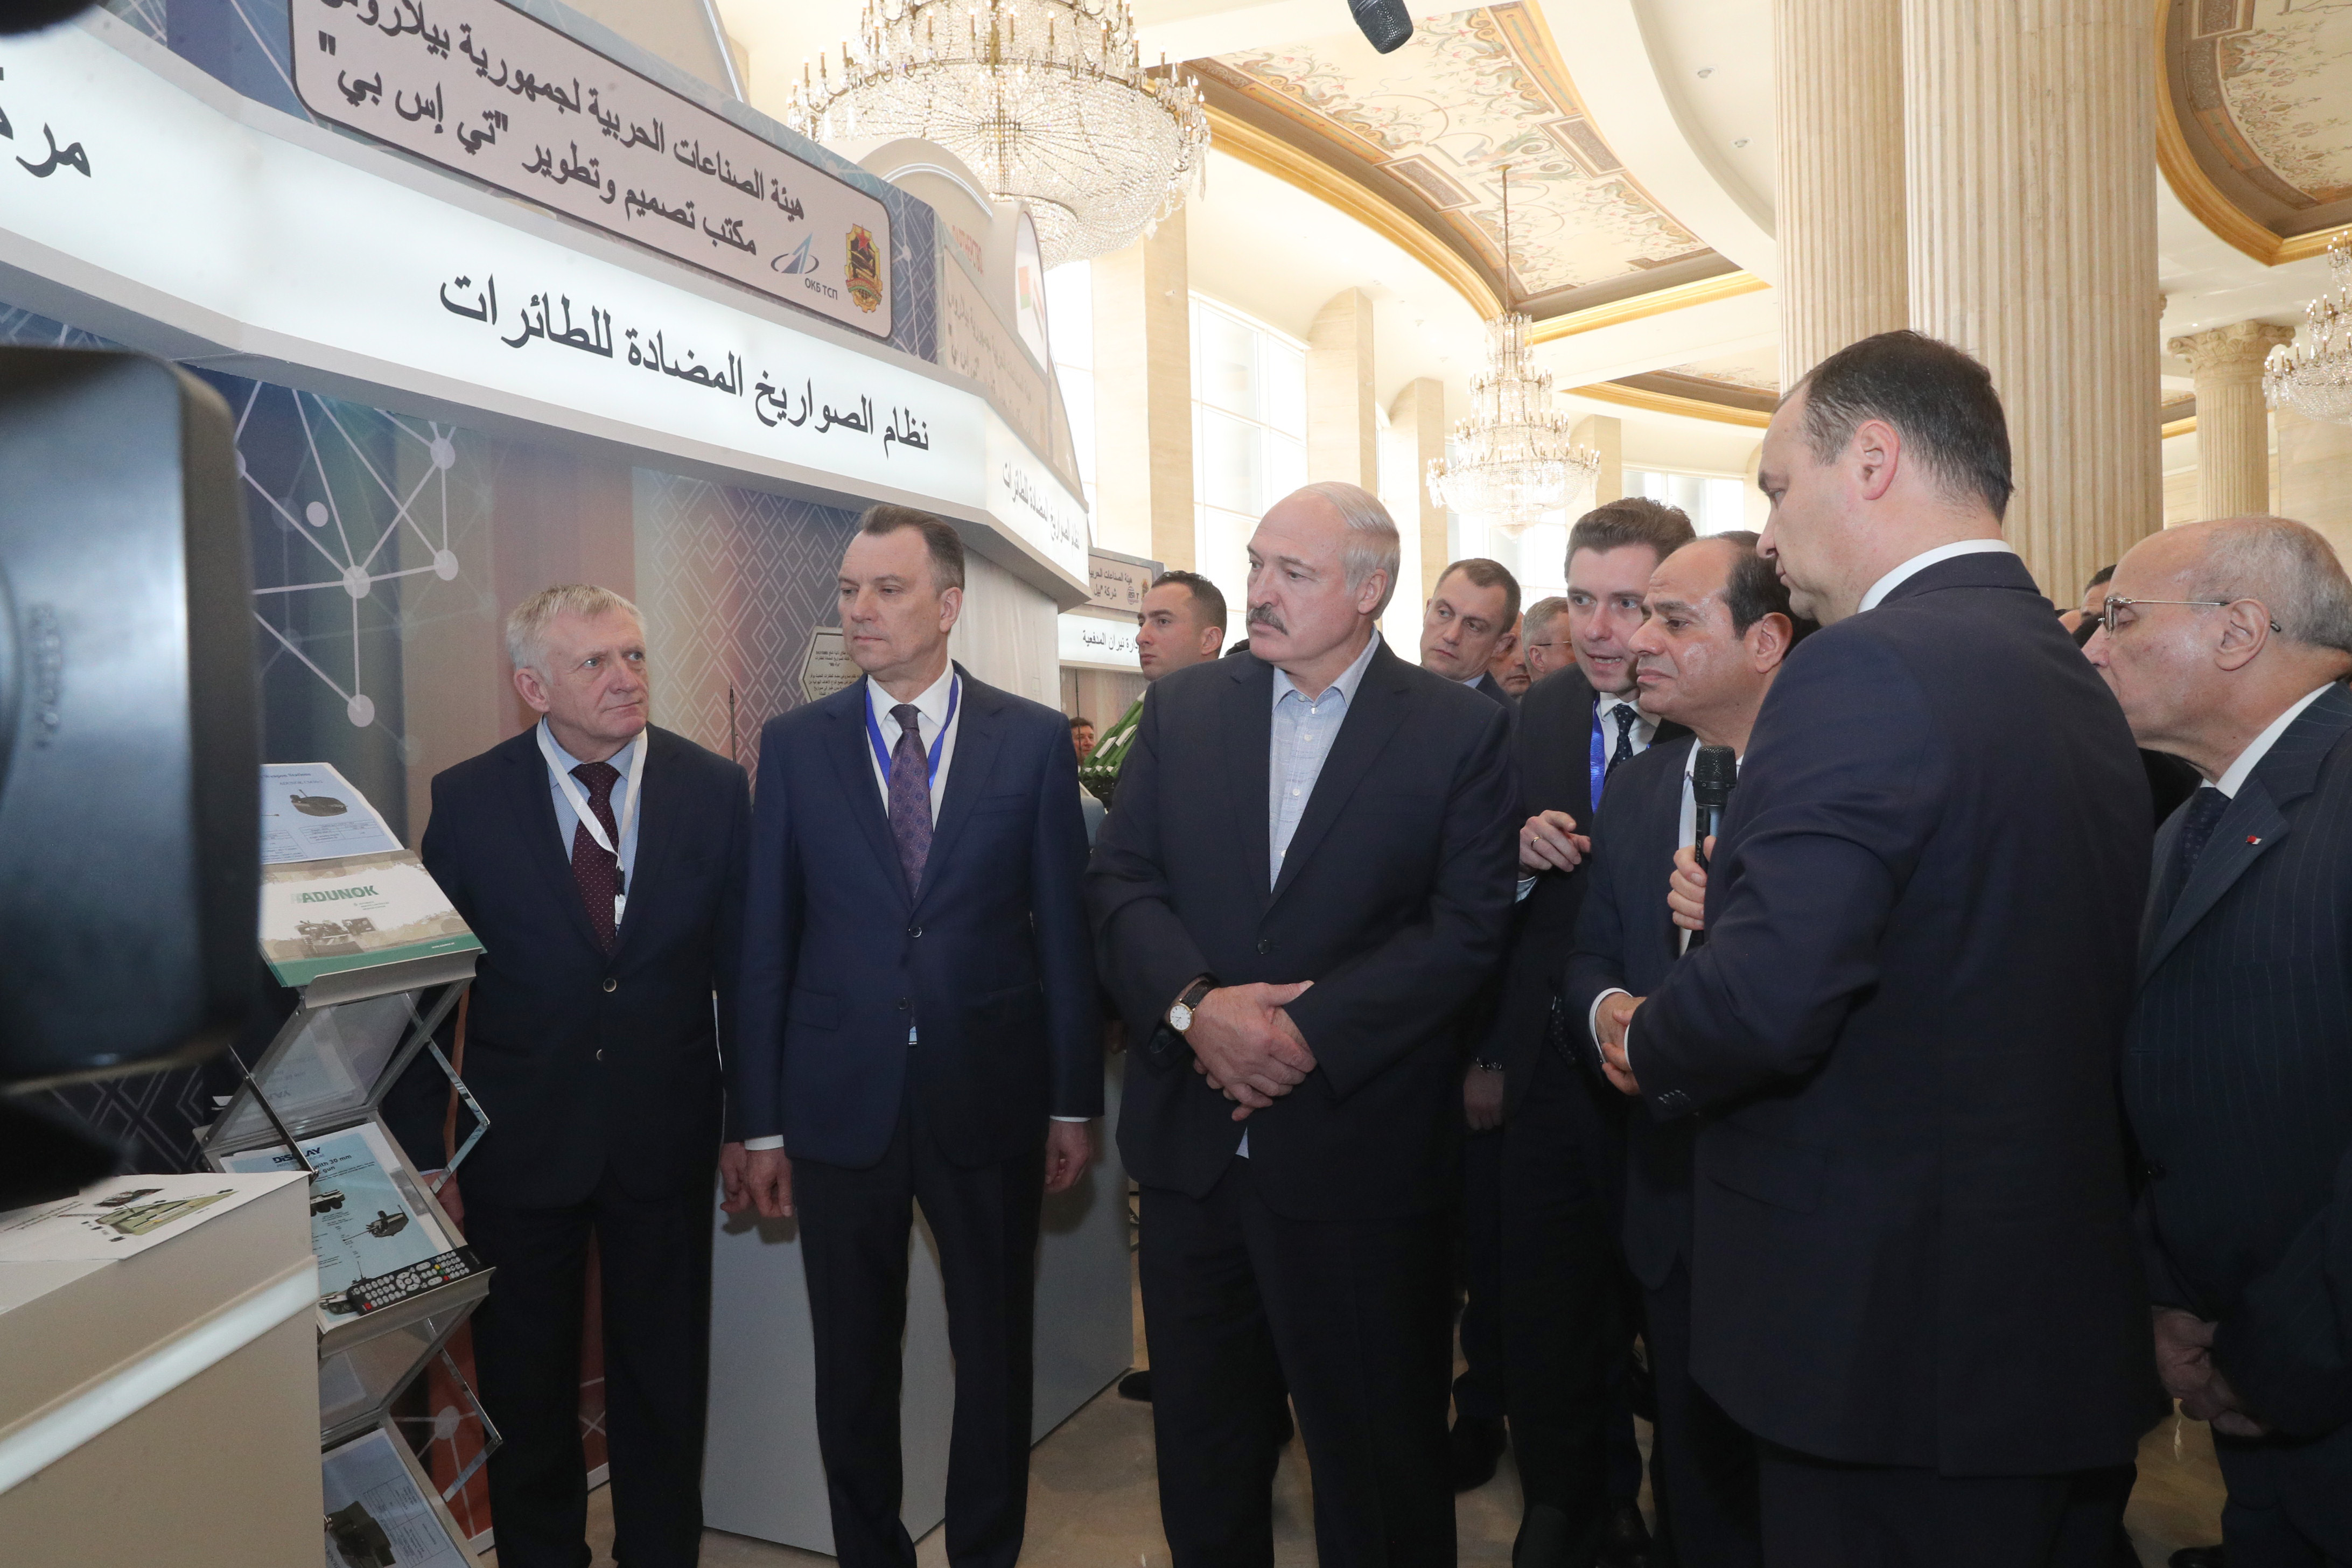 The President of the Republic of Belarus Aleksandr Lukashenko and the President of the Arab Republic of Egypt Abdel Fattah al-Sisi visit the exhibition of joint scientific and technical projects